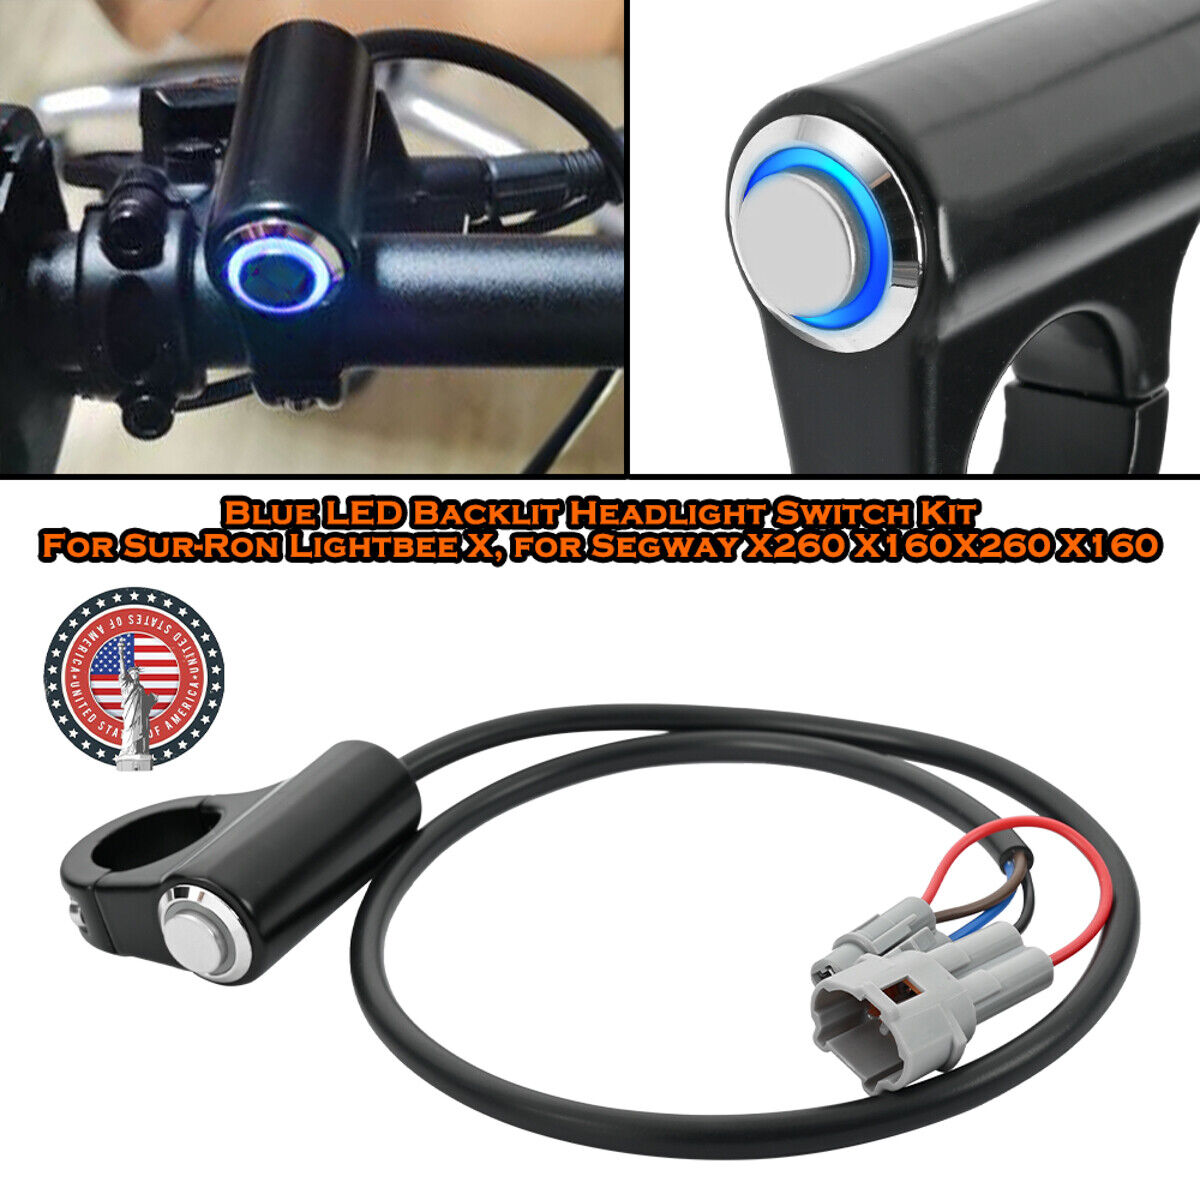 Backlit Headlight Switch Kit For Sur-Ron Lightbee X For Segway X260 X160 ALLTIMES